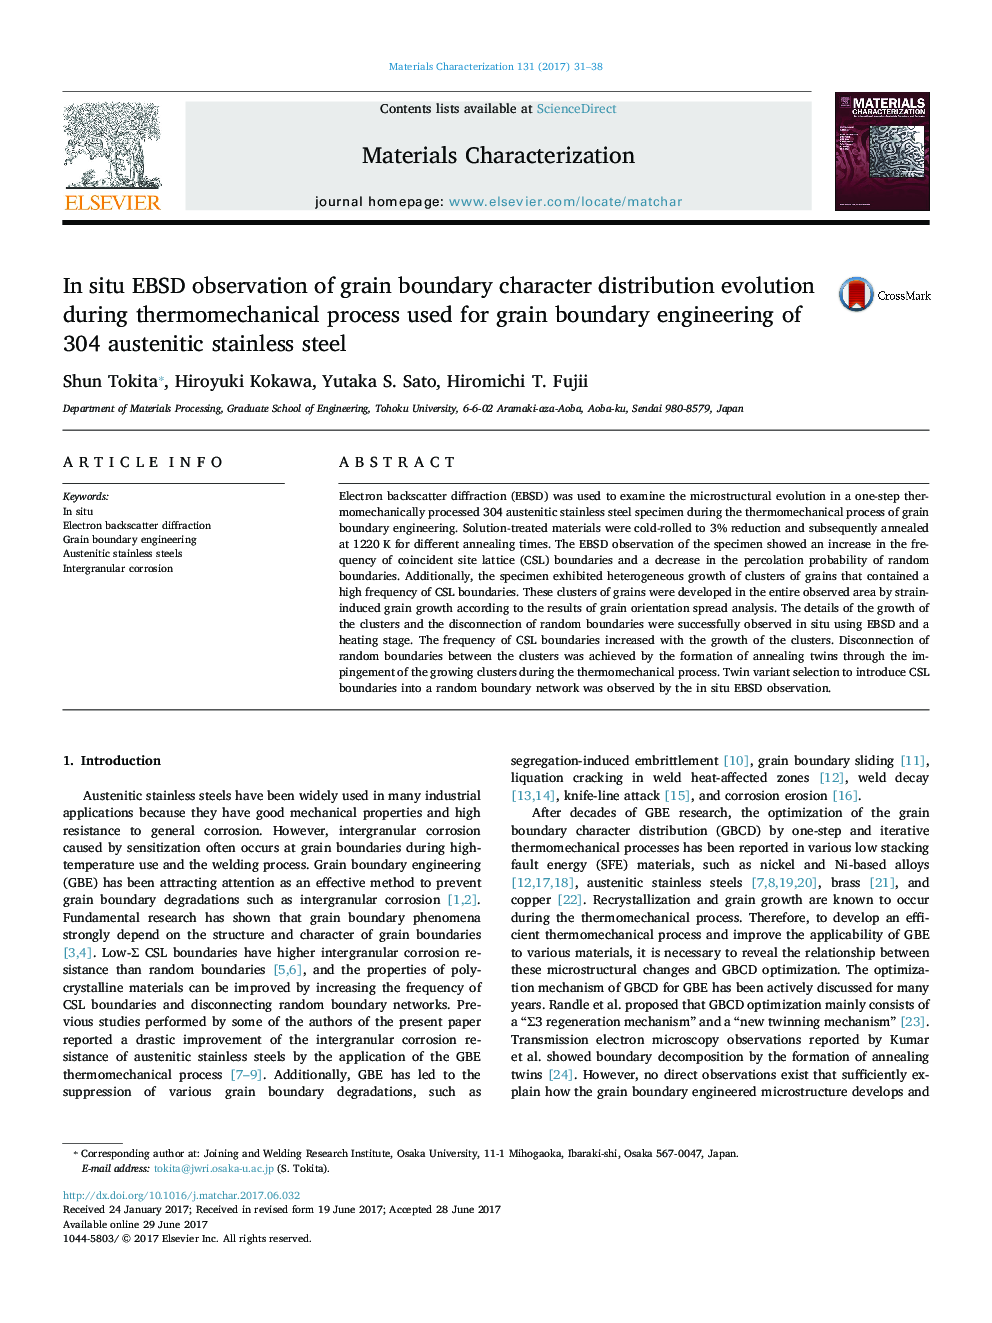 In situ EBSD observation of grain boundary character distribution evolution during thermomechanical process used for grain boundary engineering of 304 austenitic stainless steel